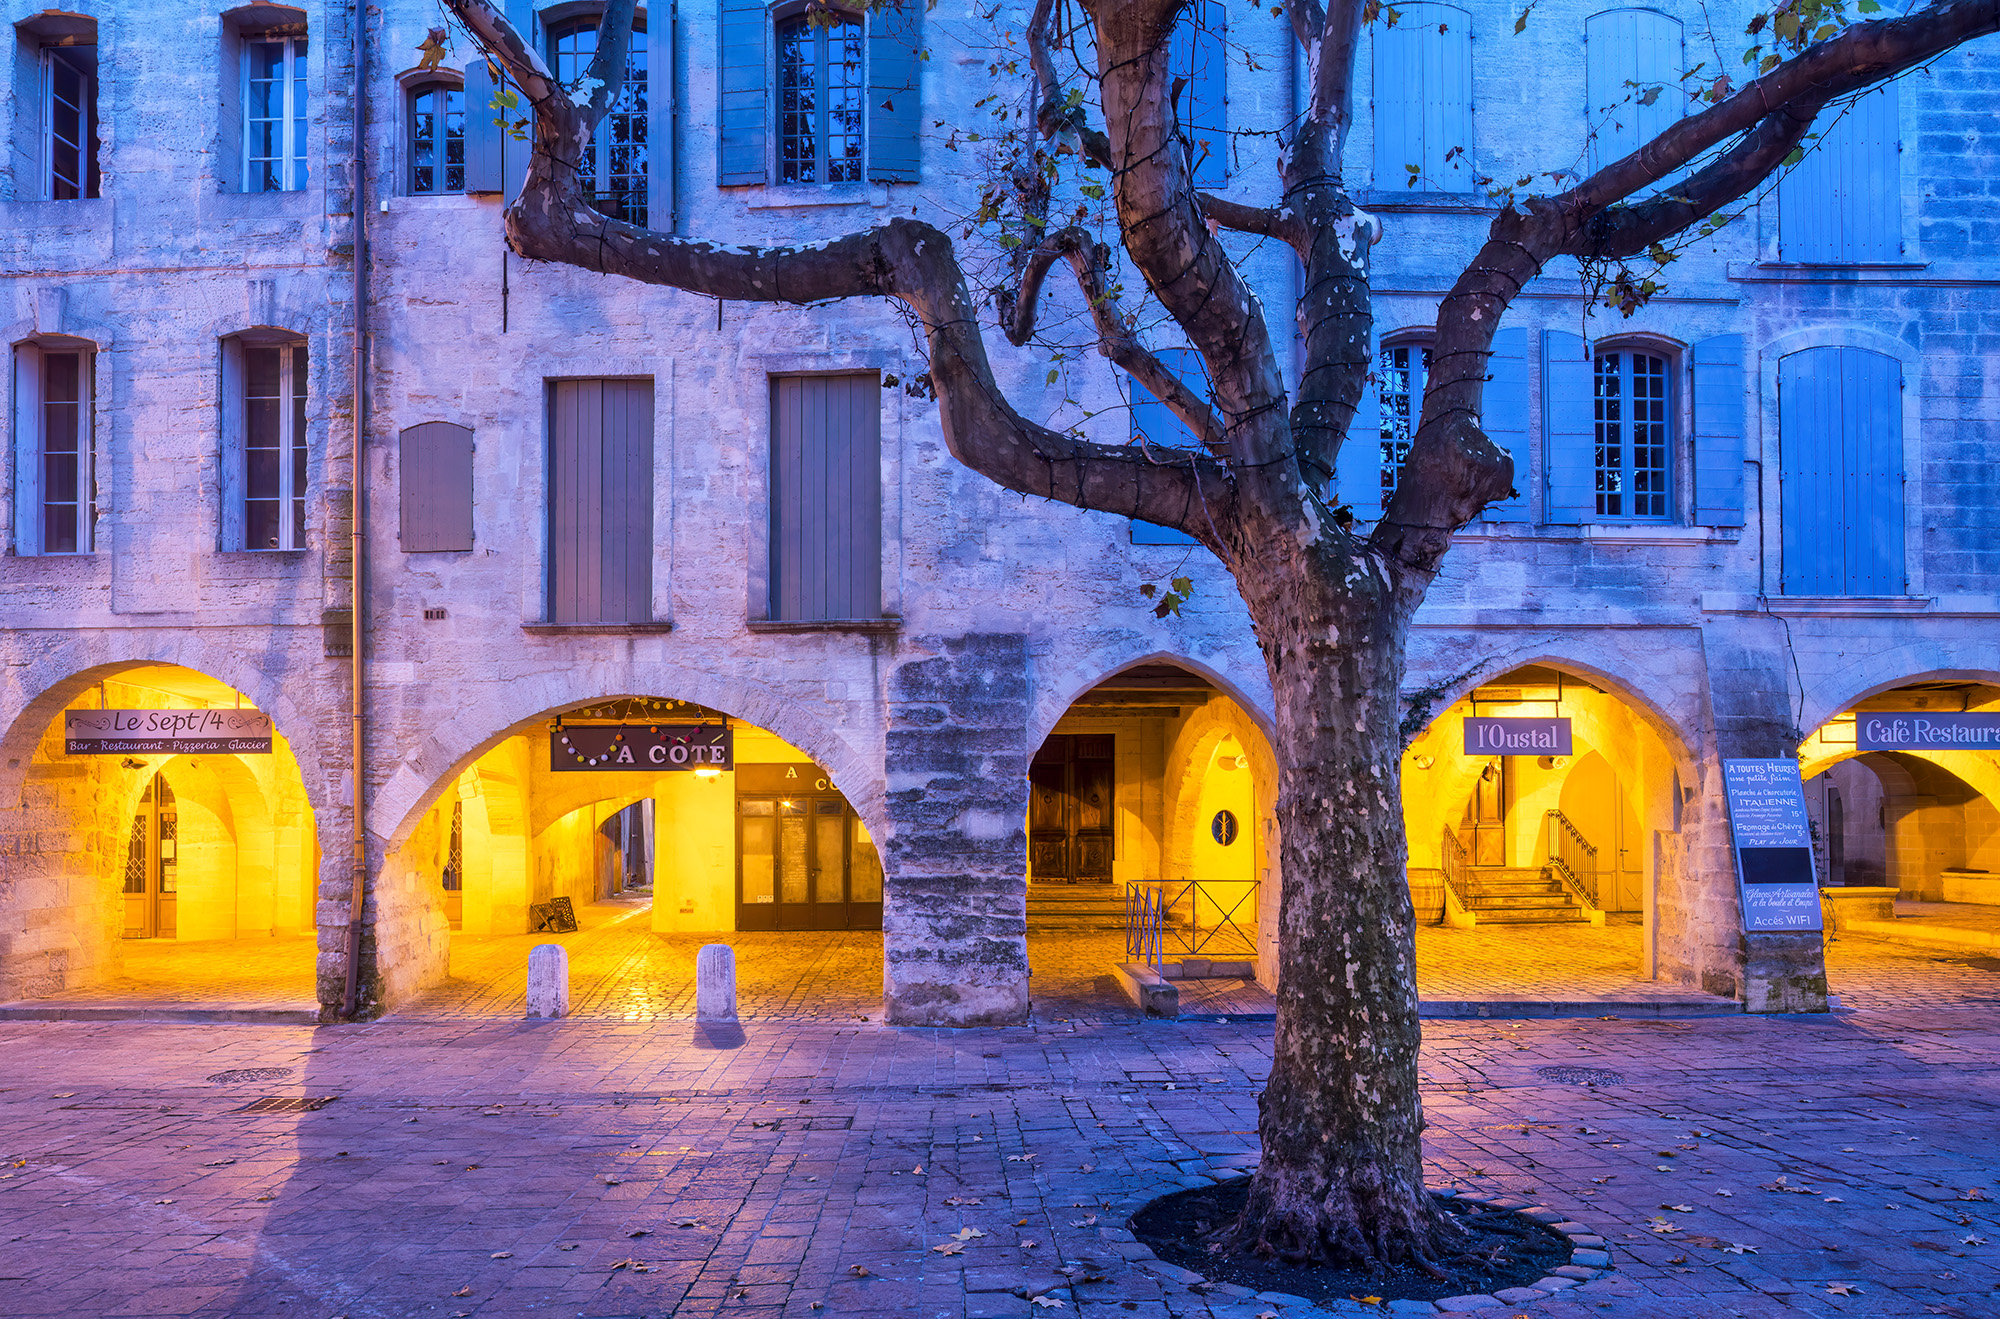 In this blue hour scene of Uzes, France, the gold arches offer a touch of "sunlight" amid the prevailing blue and purple tones...